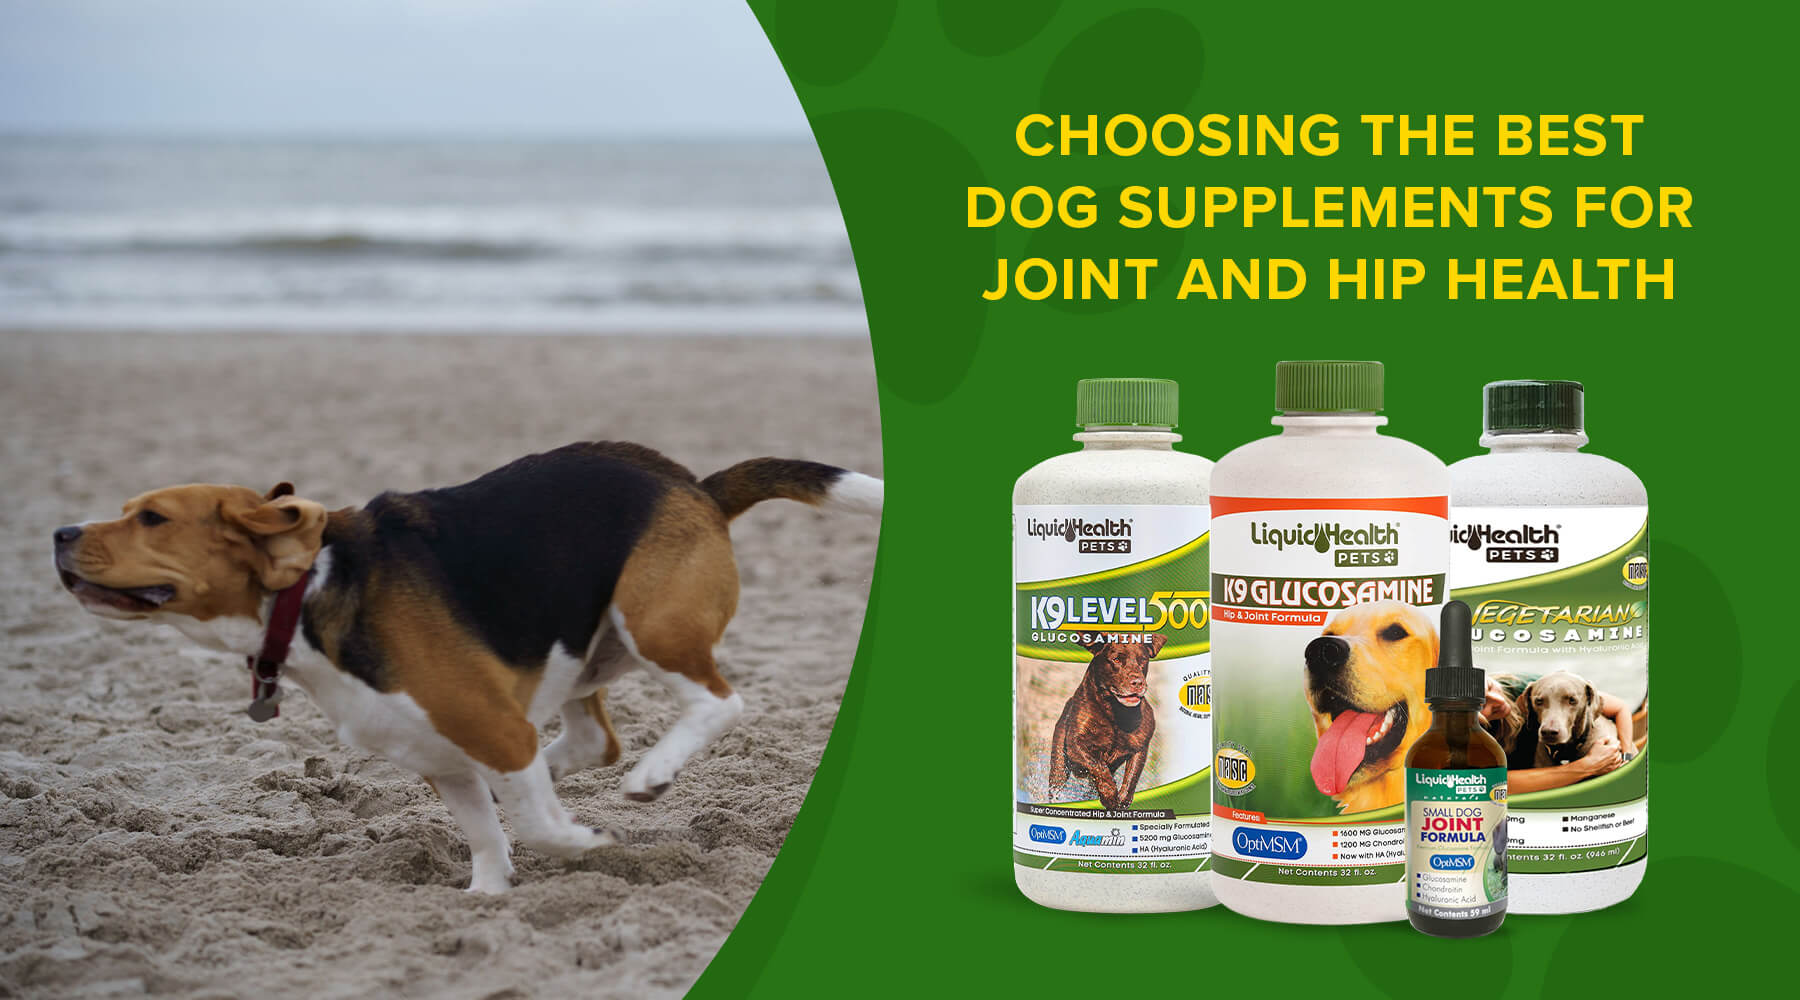 Choosing the Best Dog Supplements for Joint and Hip Health